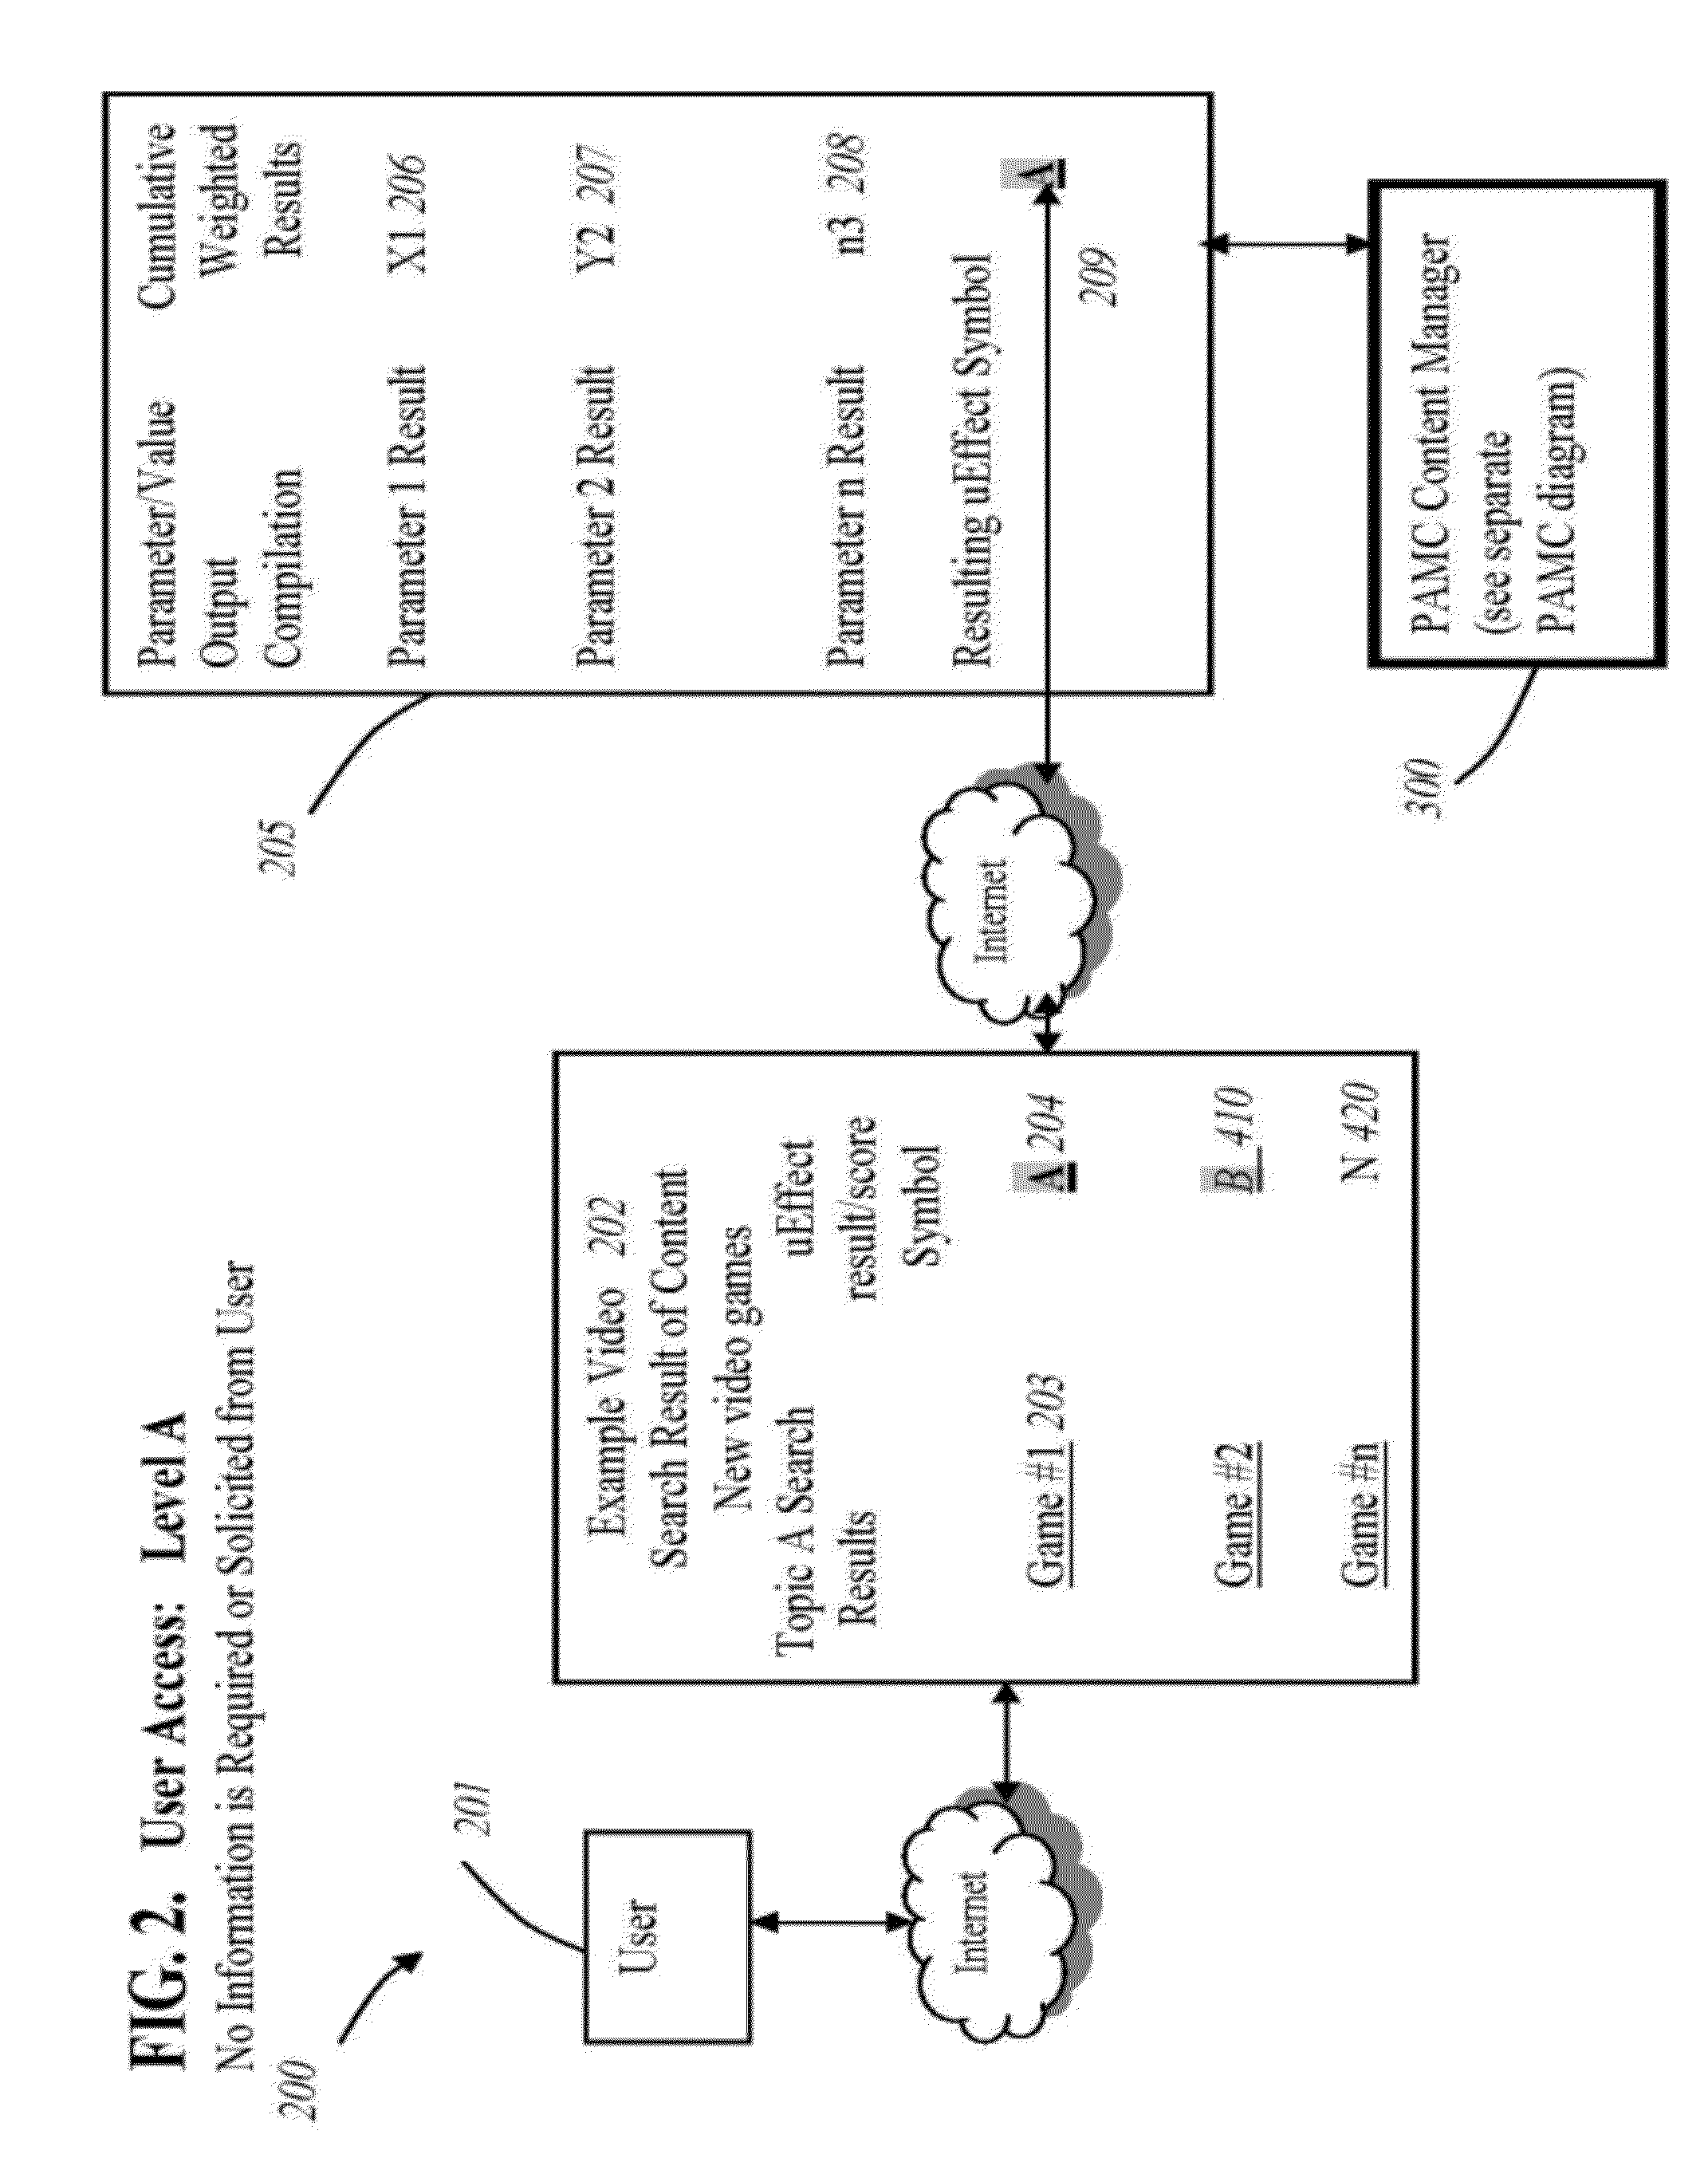 User-centric, user-weighted method and apparatus for improving relevance and analysis of information sharing and searching